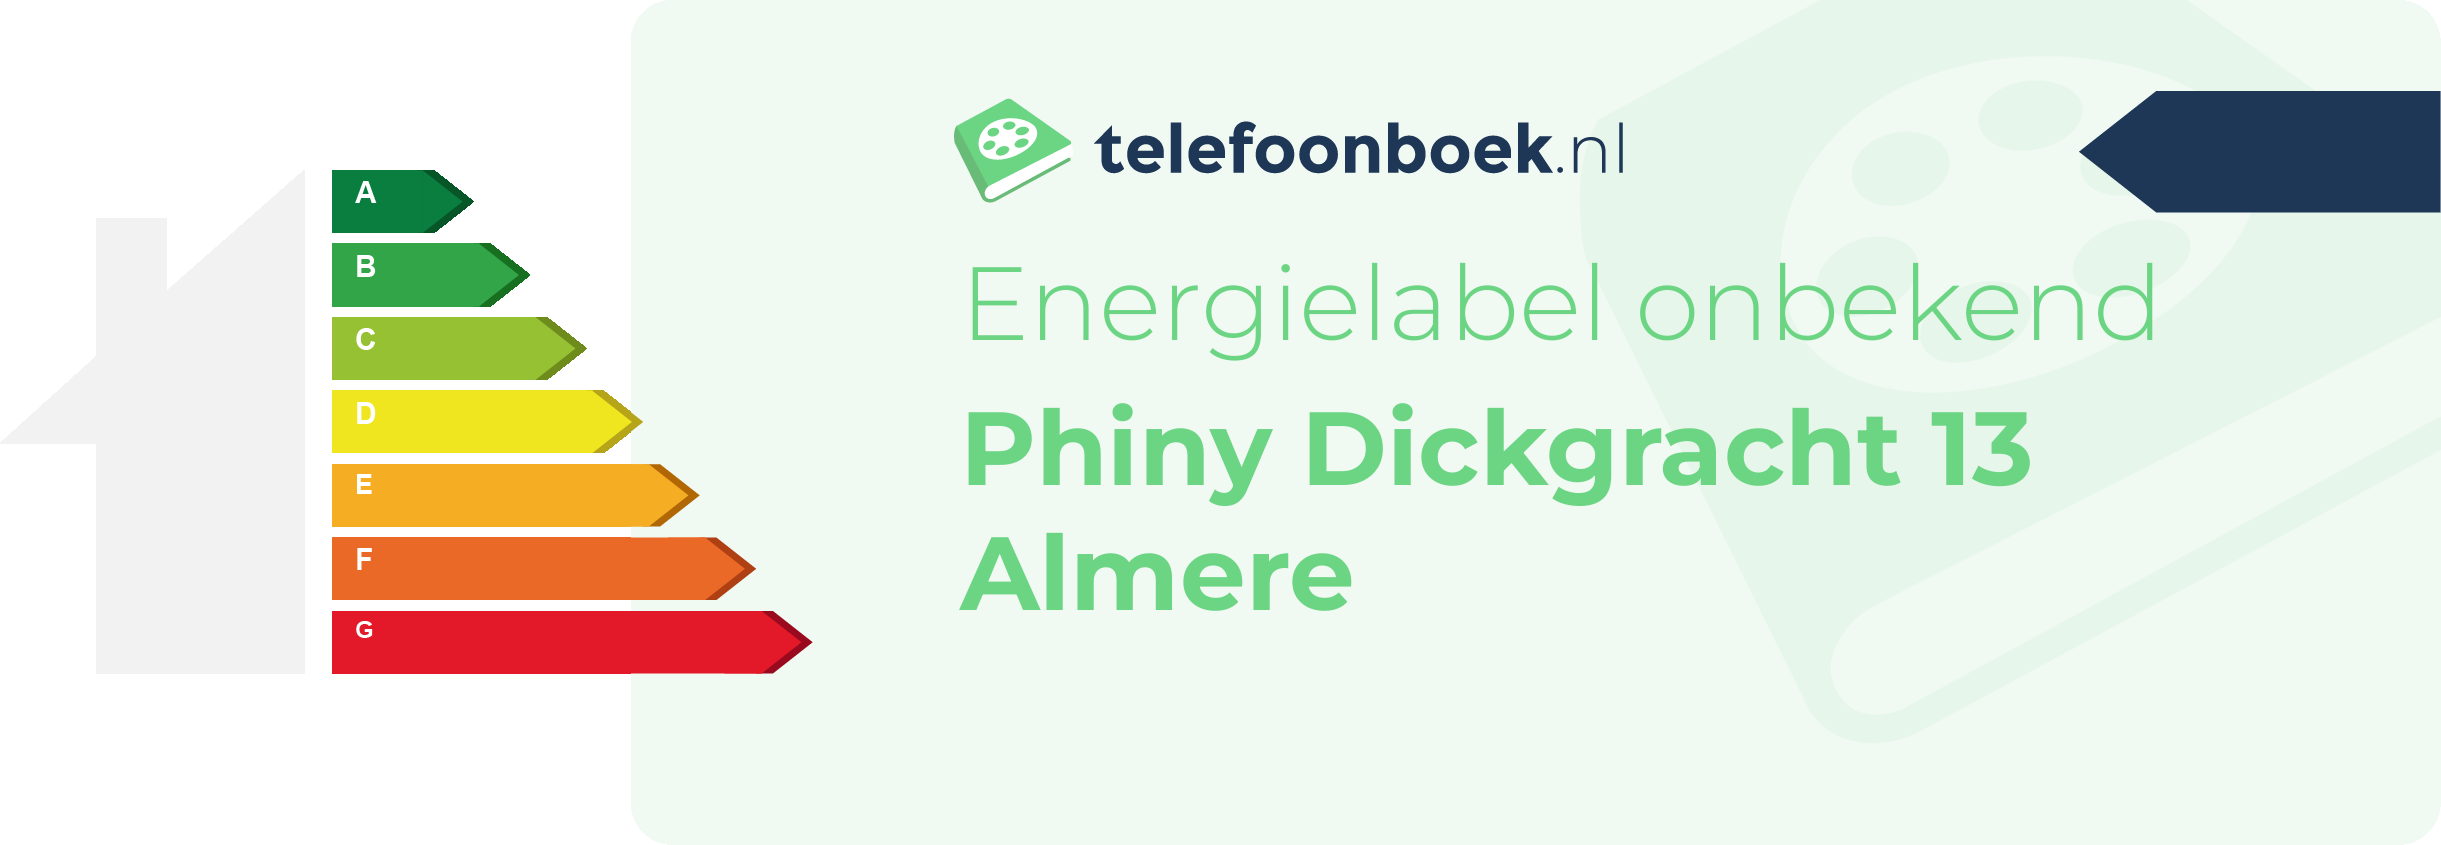 Energielabel Phiny Dickgracht 13 Almere